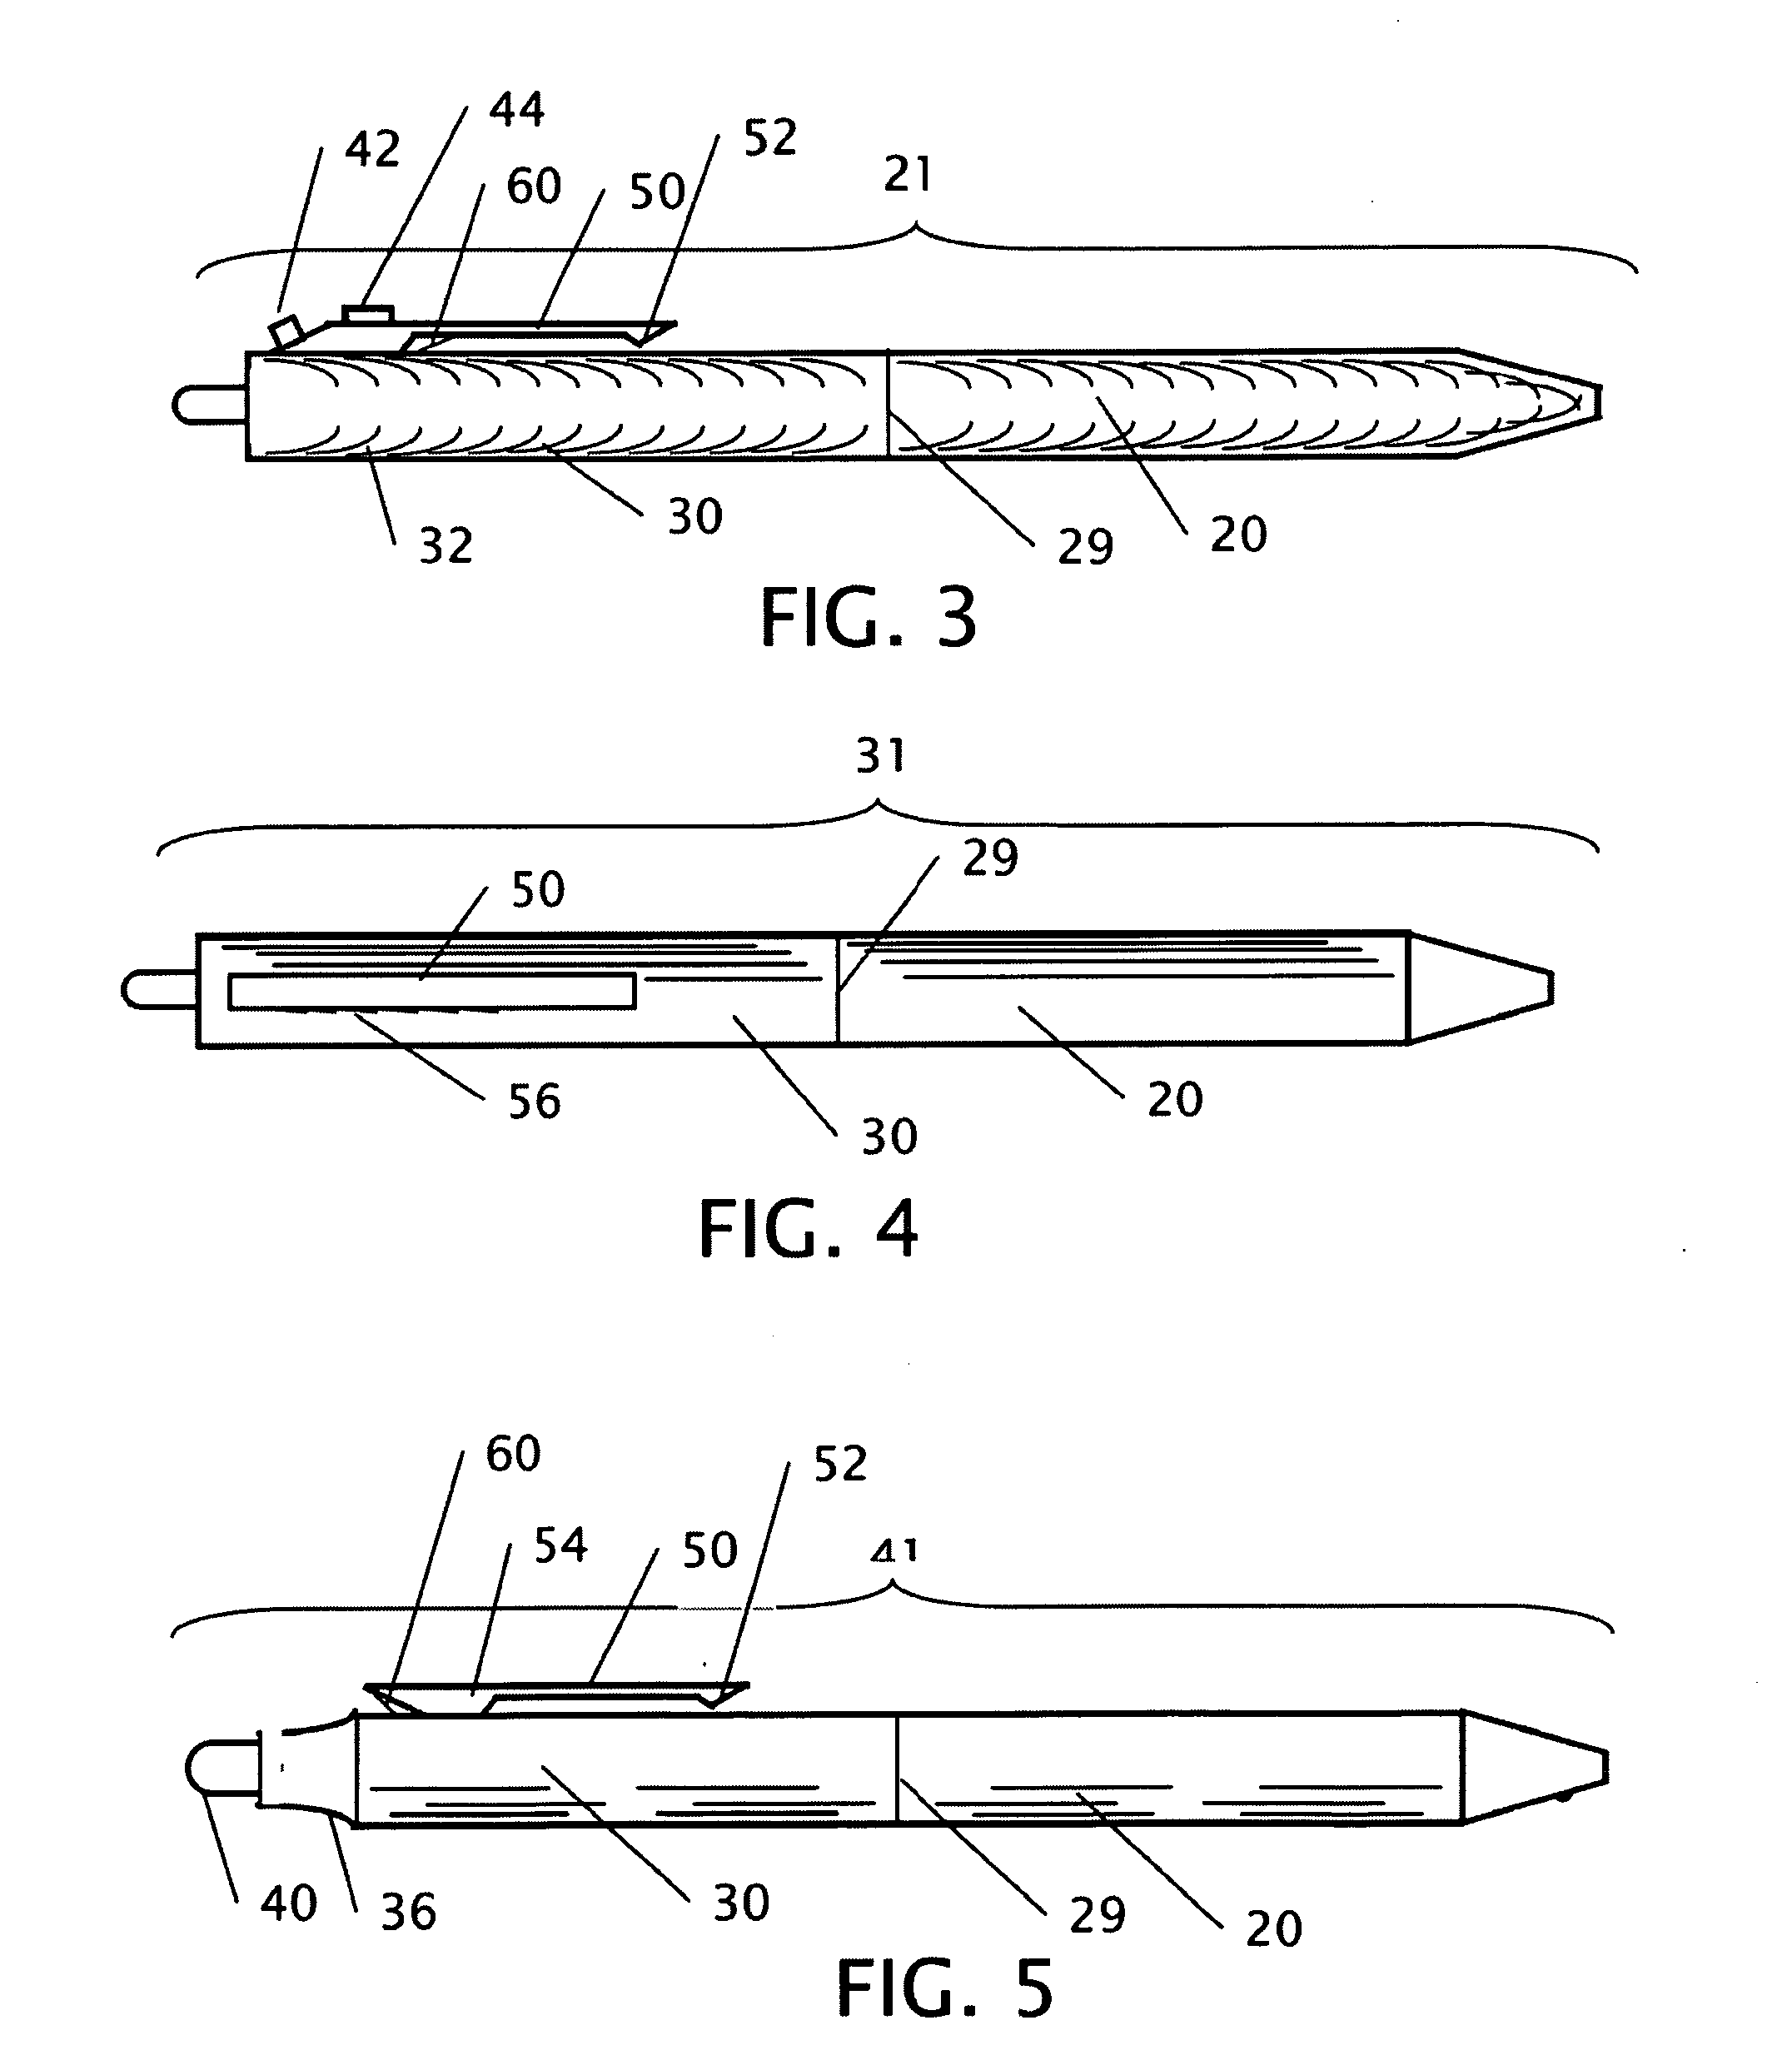 Letter opening stylus and writing instrument with pocket clip